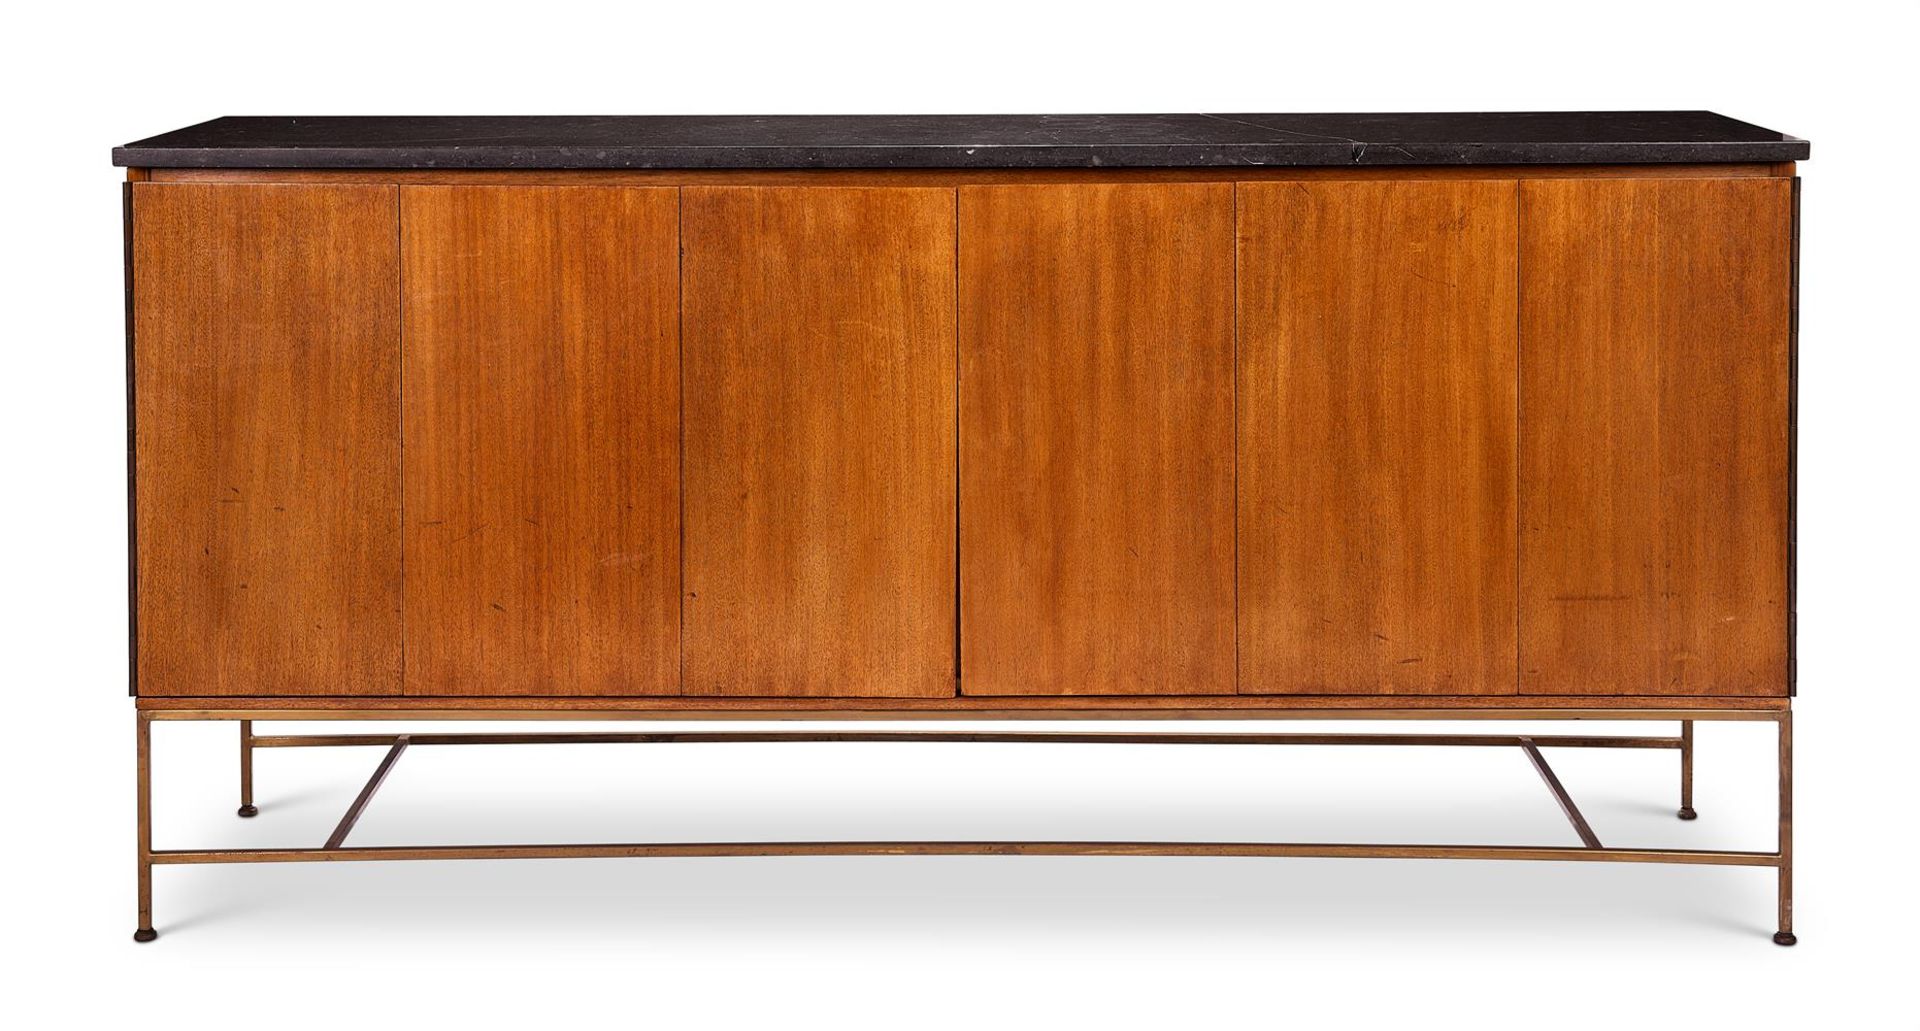 A HARDWOOD AND BRASS SIDE CABINET DESIGNED BY PAUL McCOBB (1917-1969)